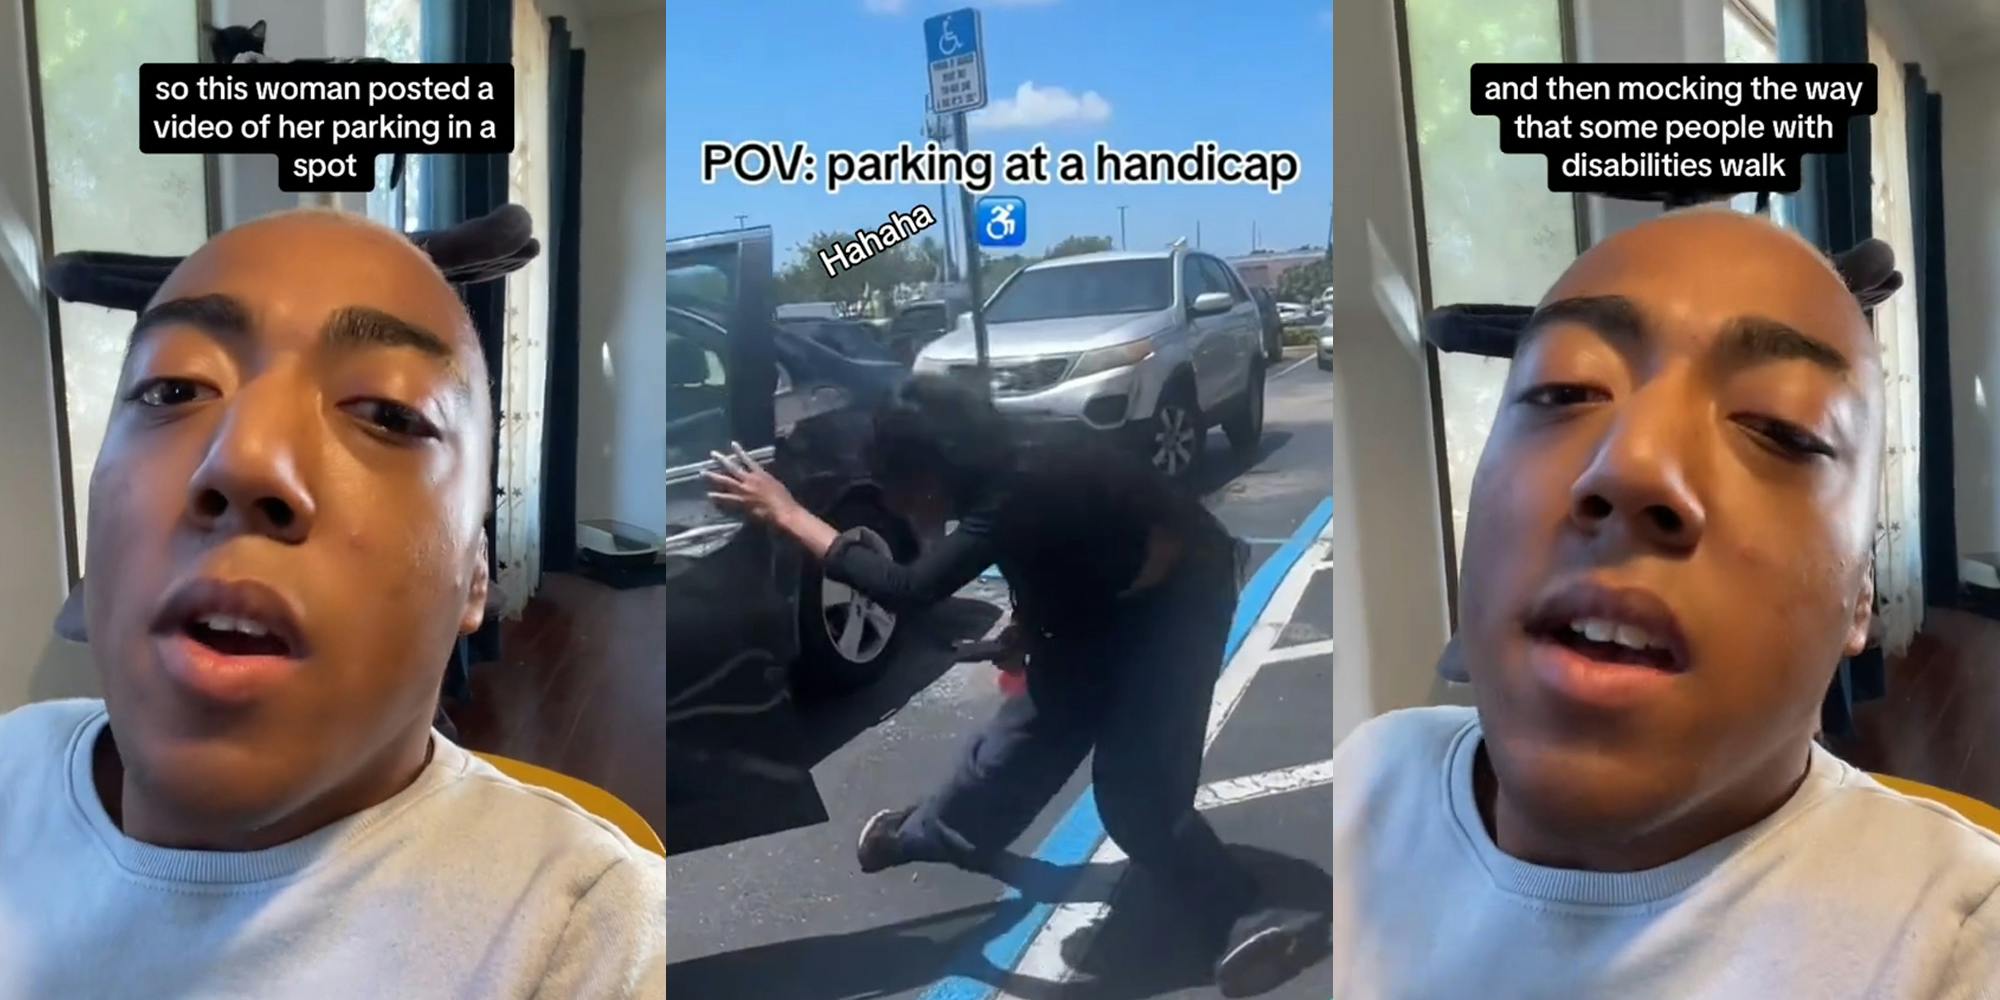 man speaking with caption "so this woman posted a video of her parking in a spot" (l) woman in handicap parking spot with caption "POV: parking at a handicap hahaha" (c) man speaking with caption "and then mocking the way that some people with disabilities walk" (r)